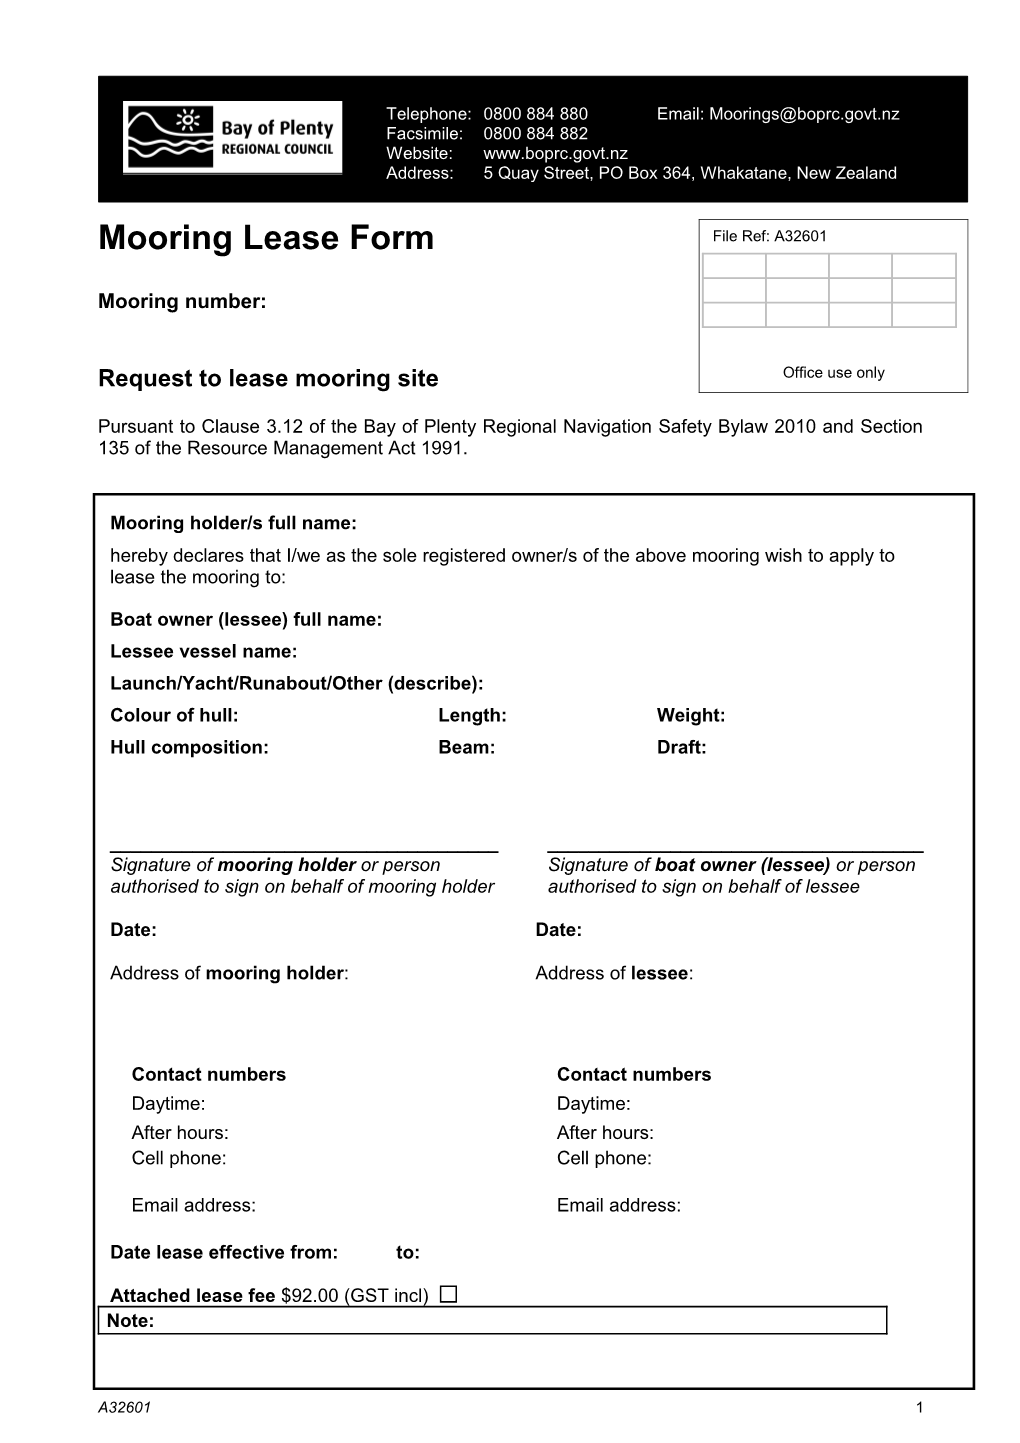 Request to Lease Mooring Site